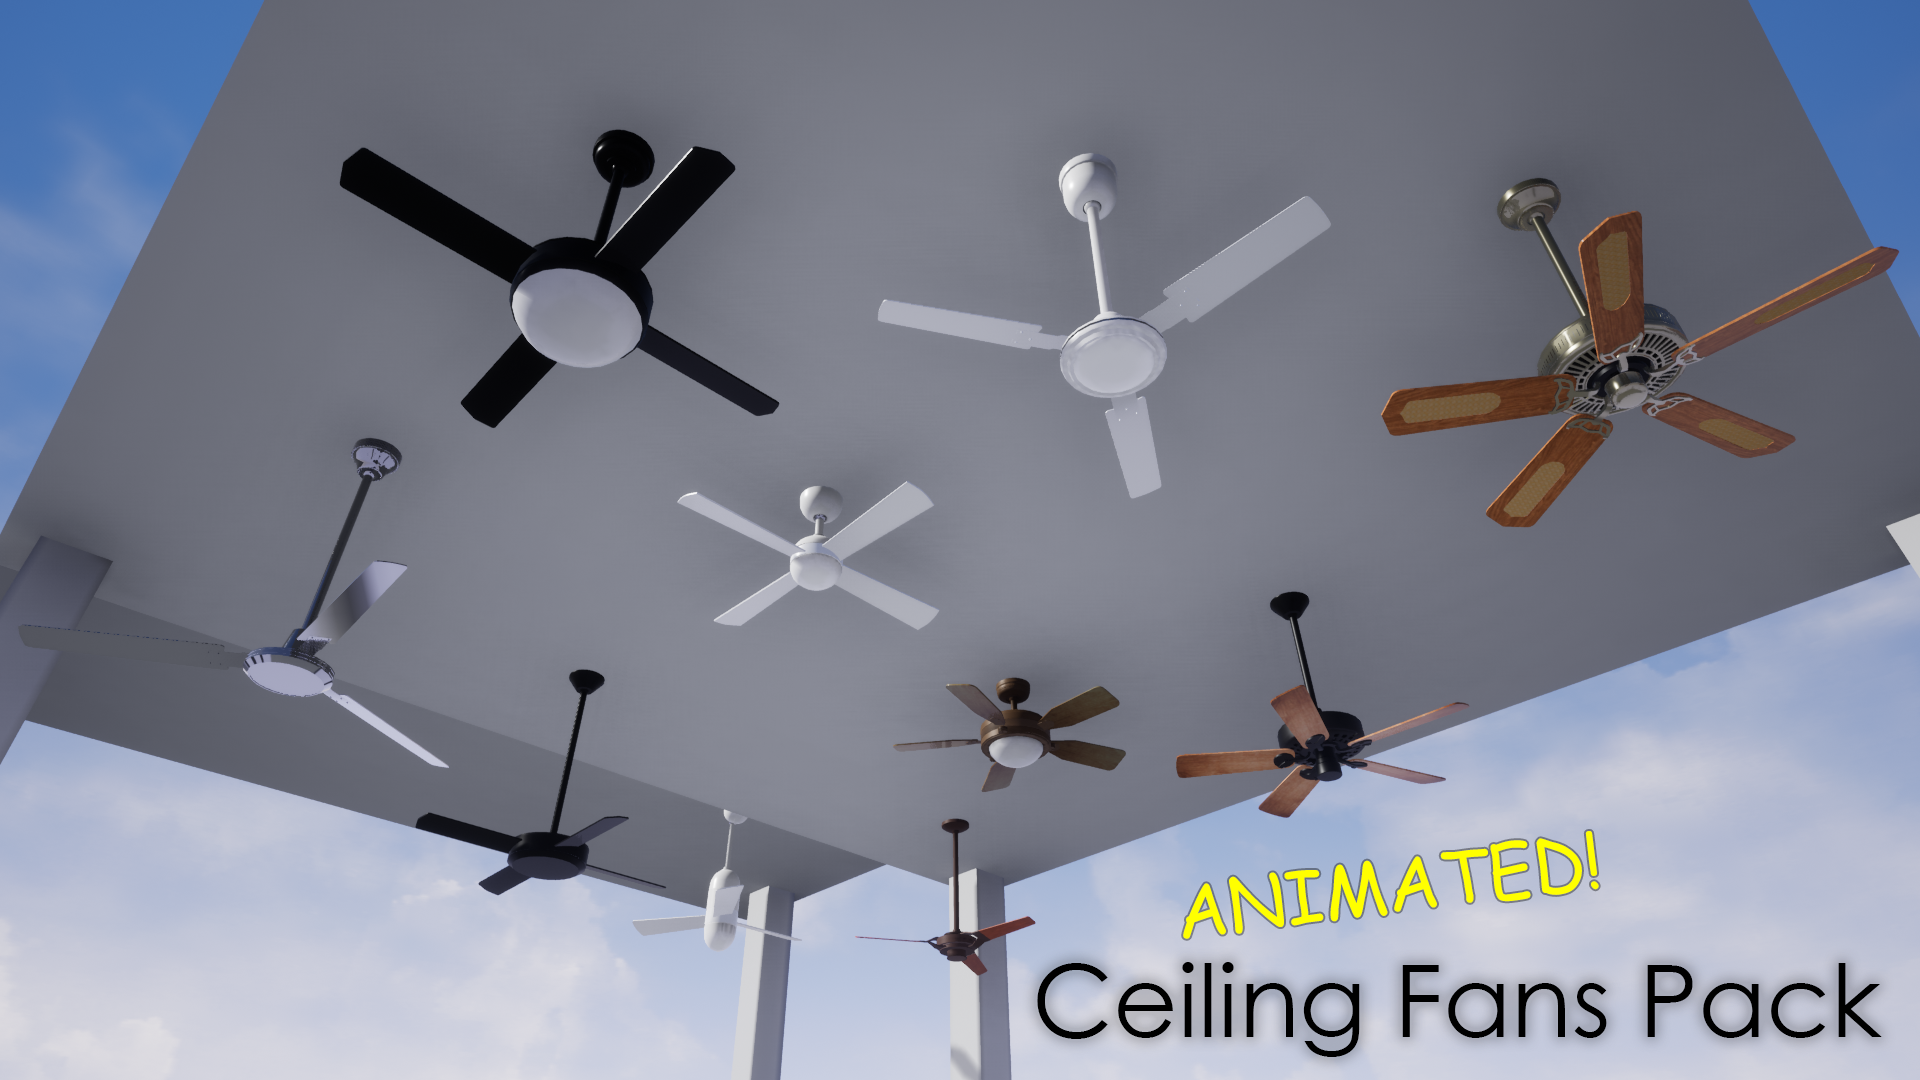 Ceiling Fans Pack - Now available!